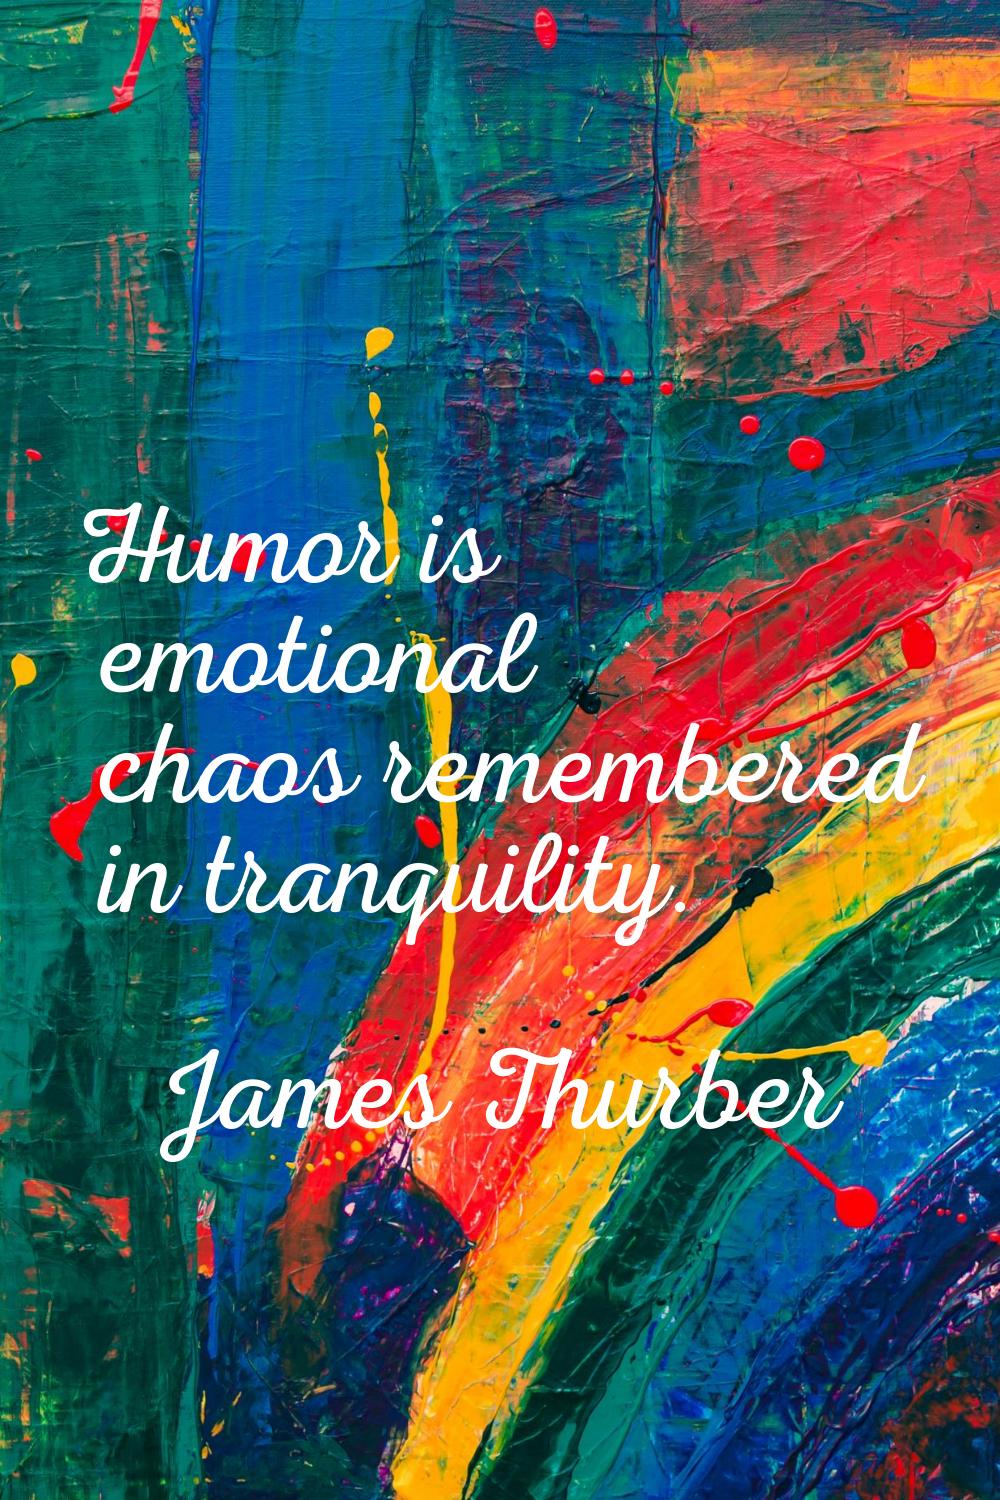 Humor is emotional chaos remembered in tranquility.